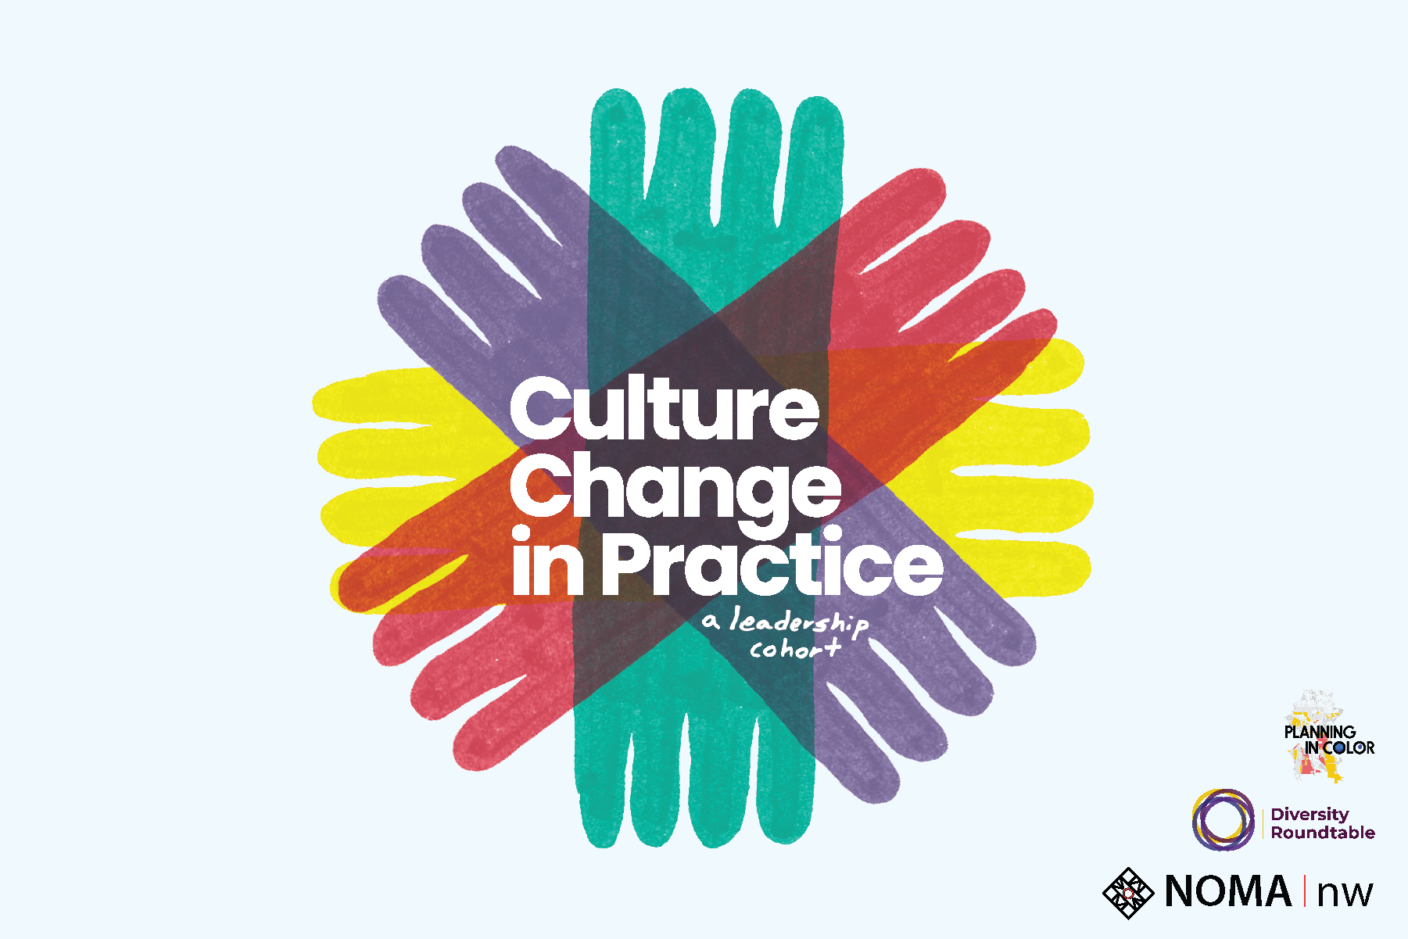 AIA Seattle, in close collaboration with NOMA Northwest and Planning in Color, is proud to announce its second edition of the Culture Change in Practice program.